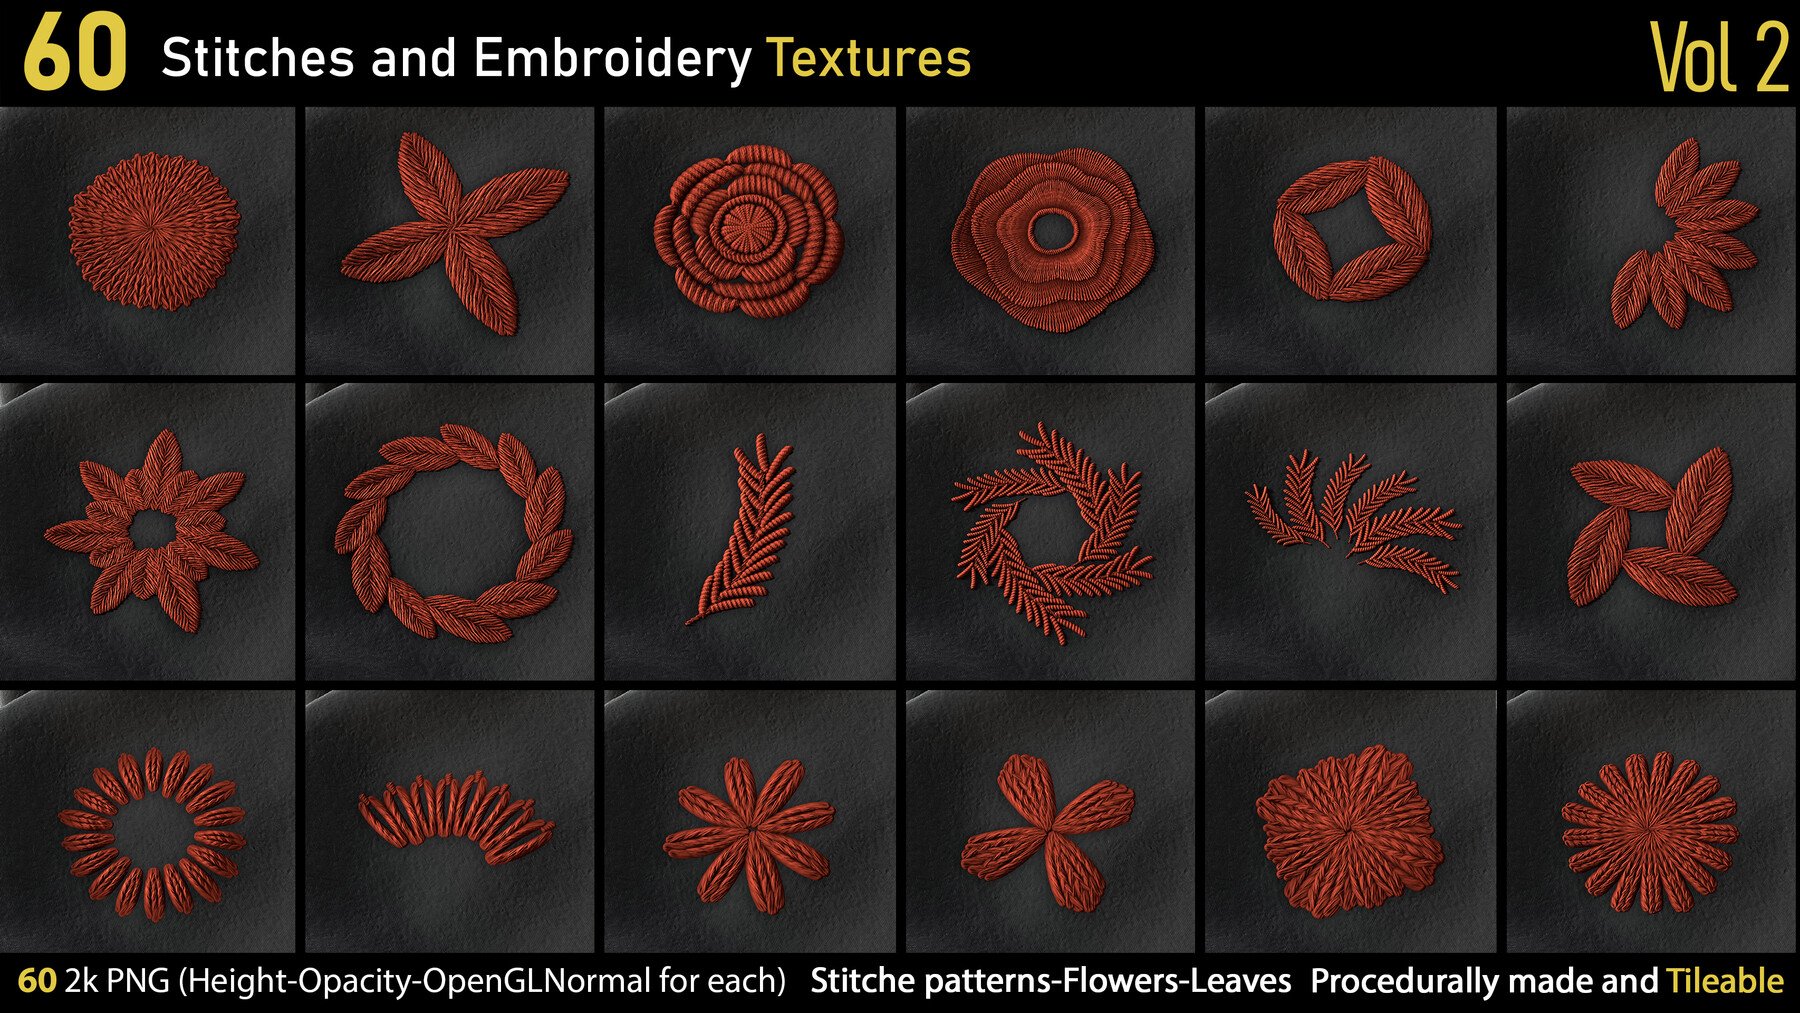 60 Stitches and Embroidery Textures Vol.2